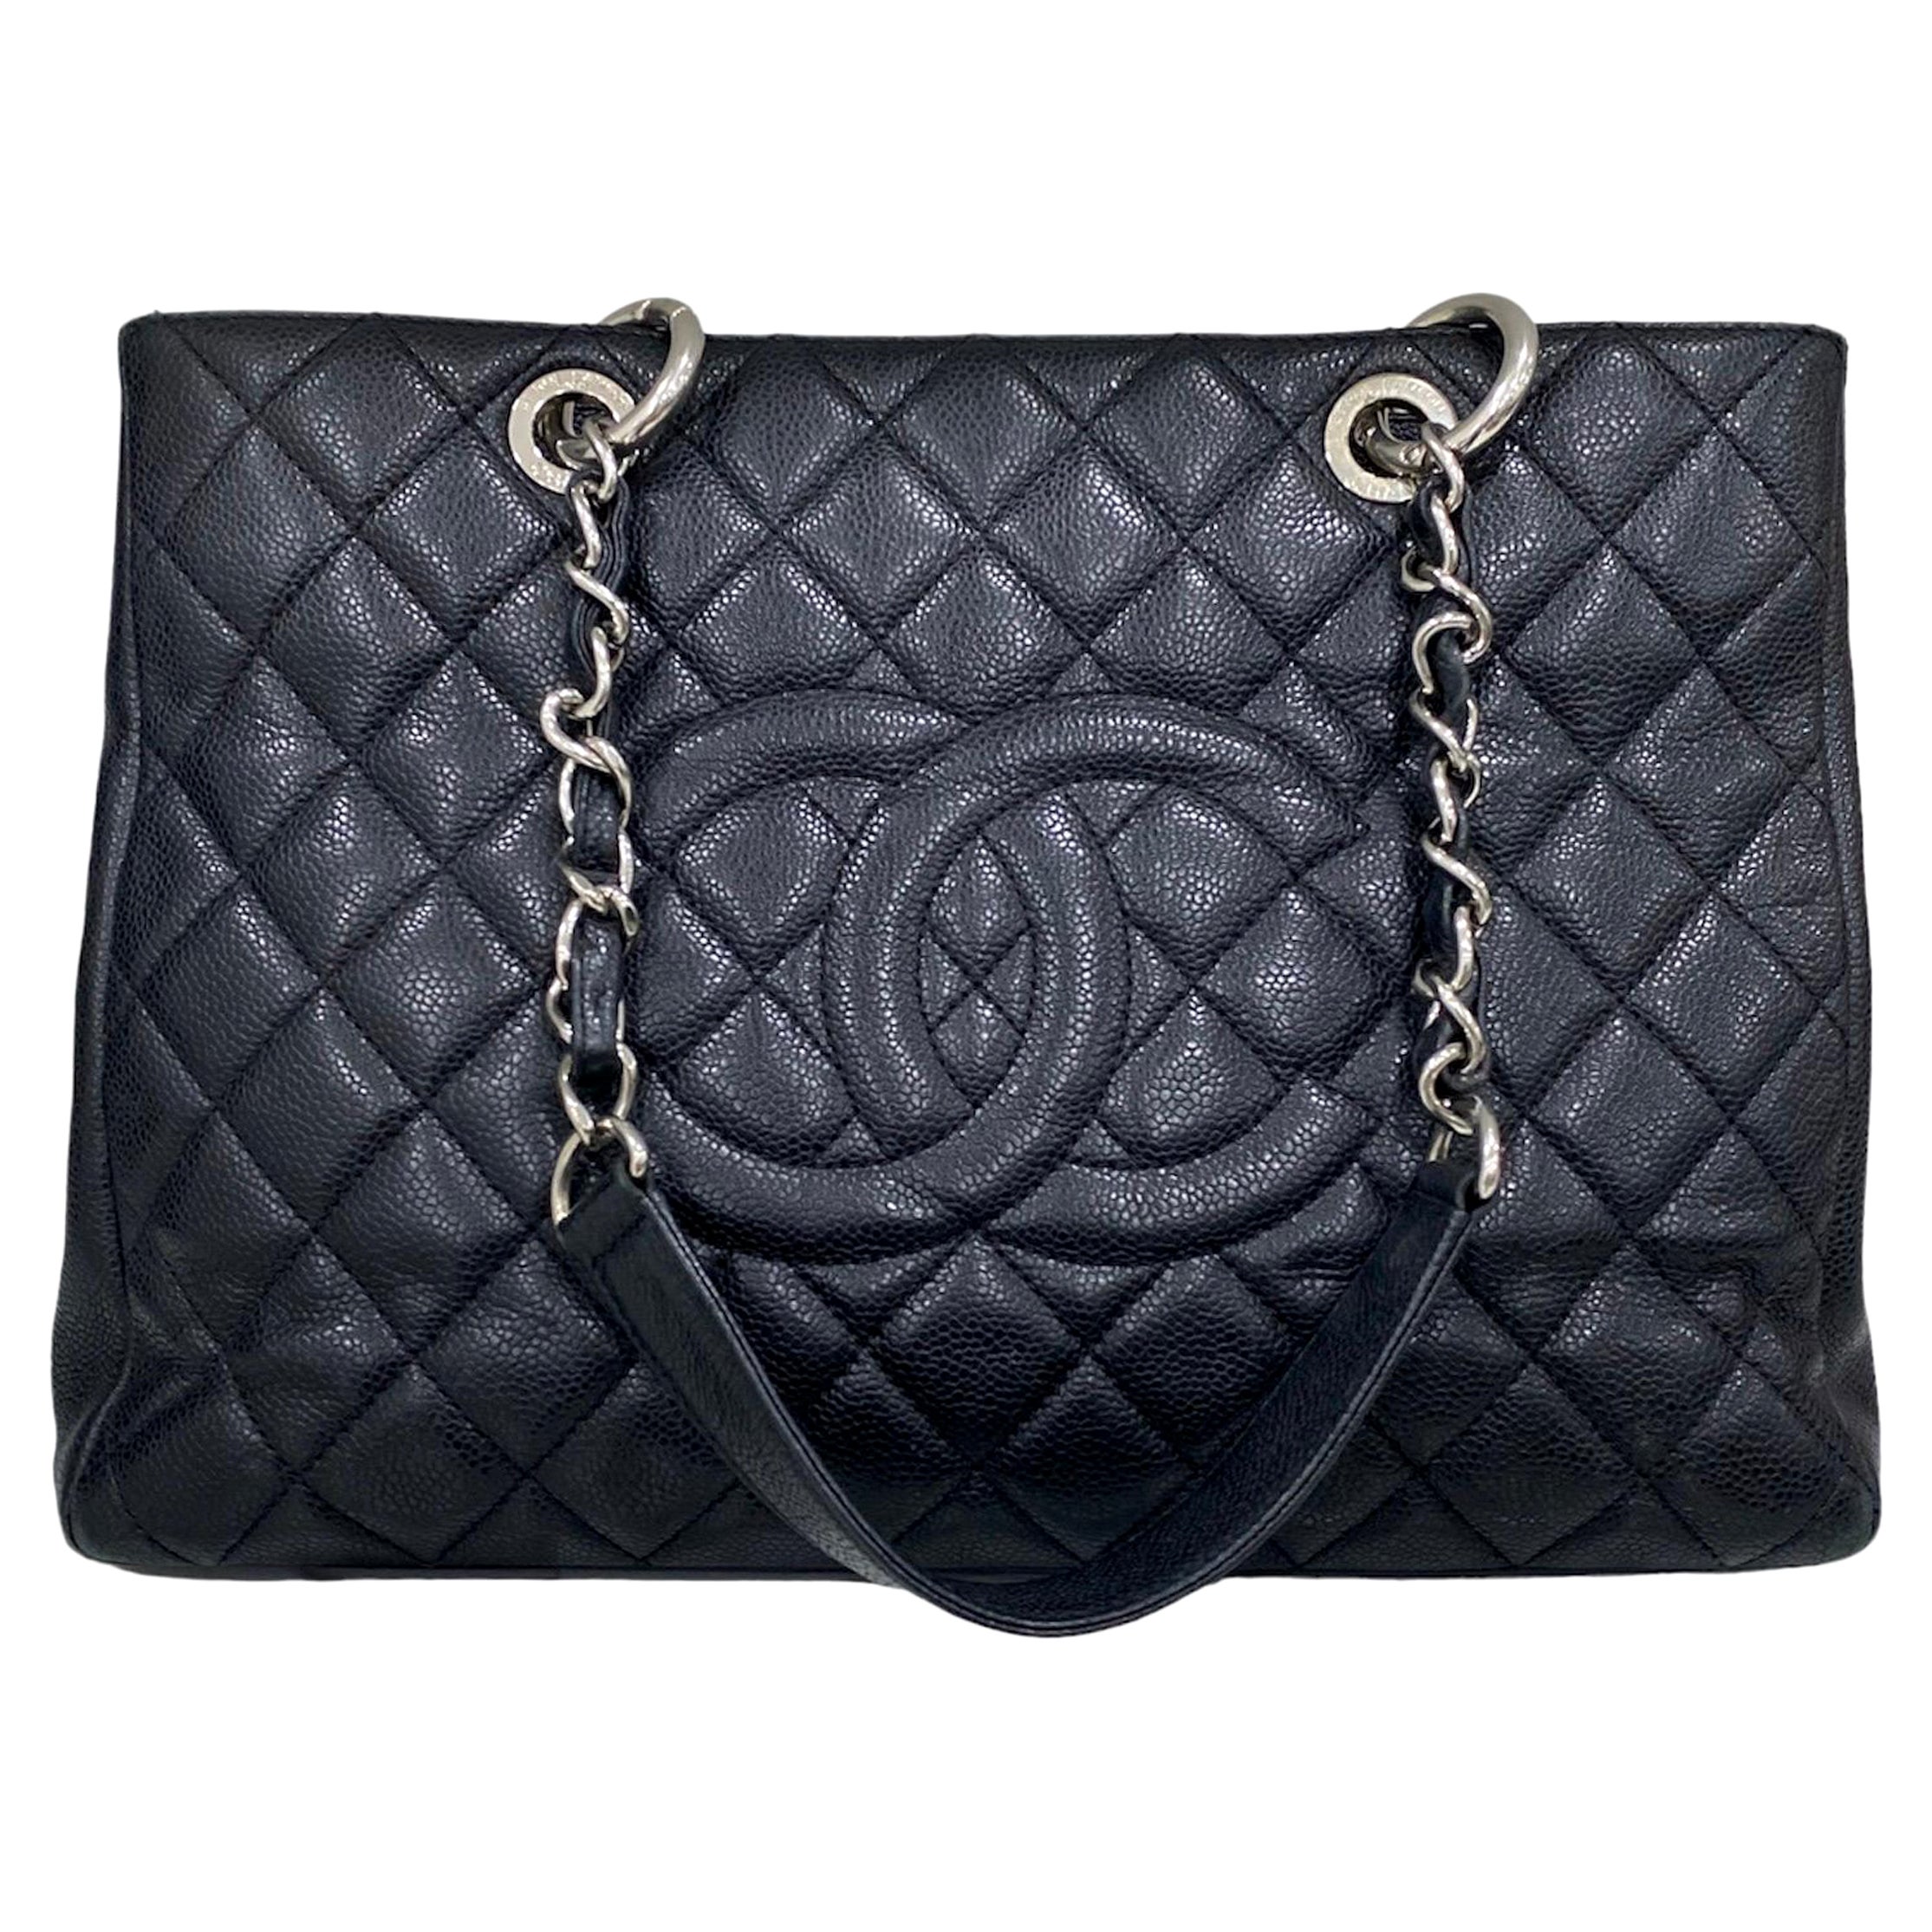 2011 Chanel GST Grand Shopping Tote Black Caviar For Sale at